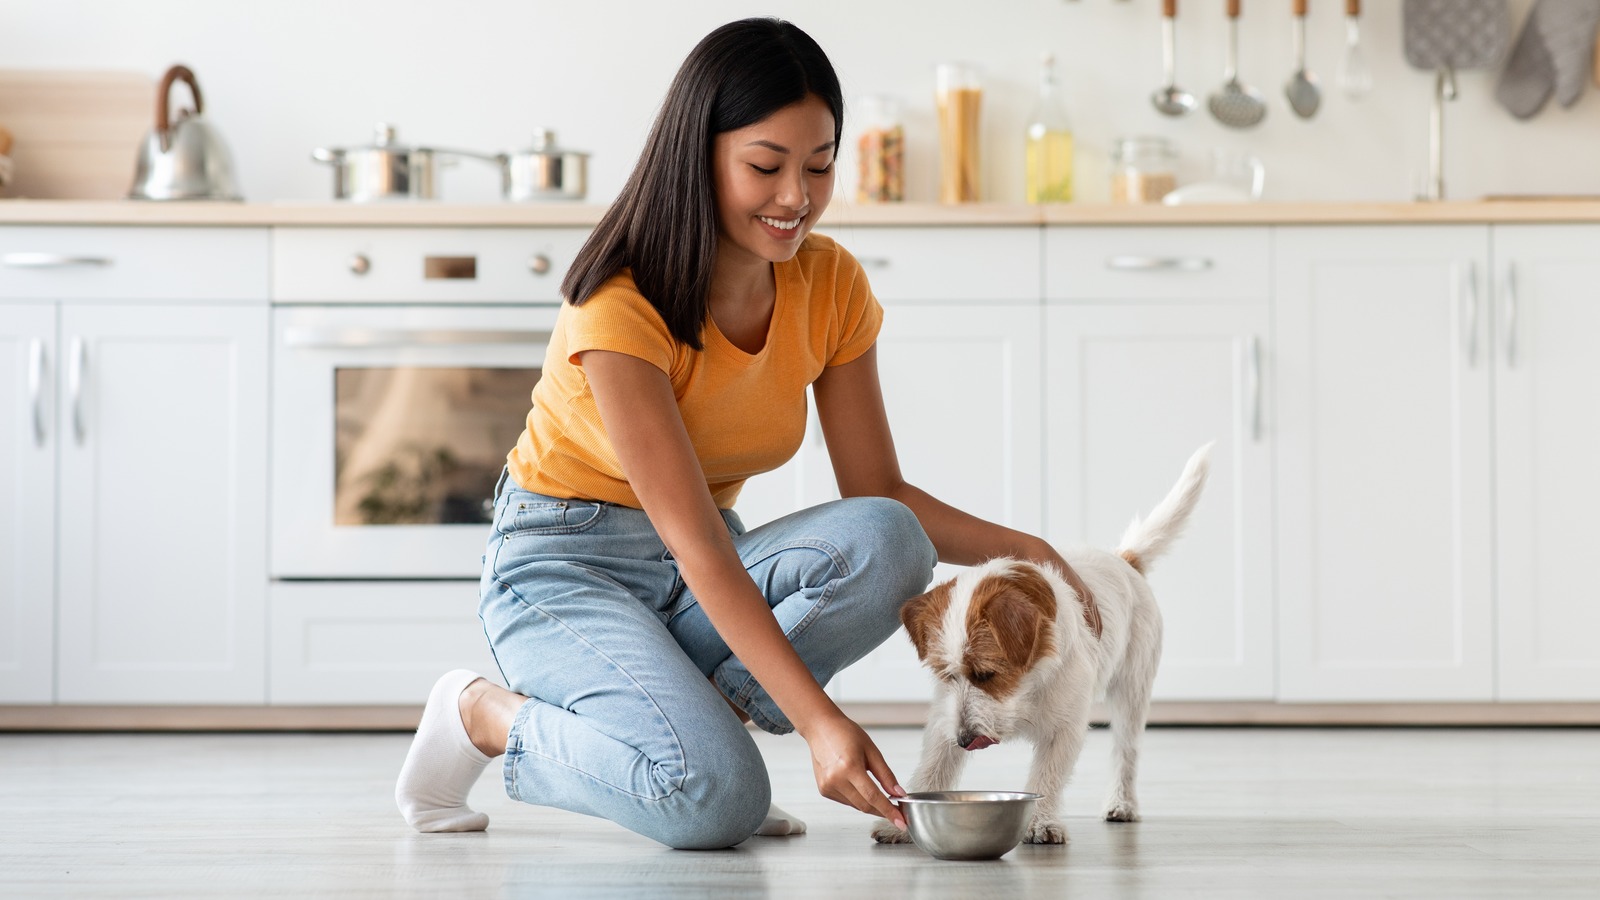 5 Tips For Asking Your Landlord About Getting A Pet